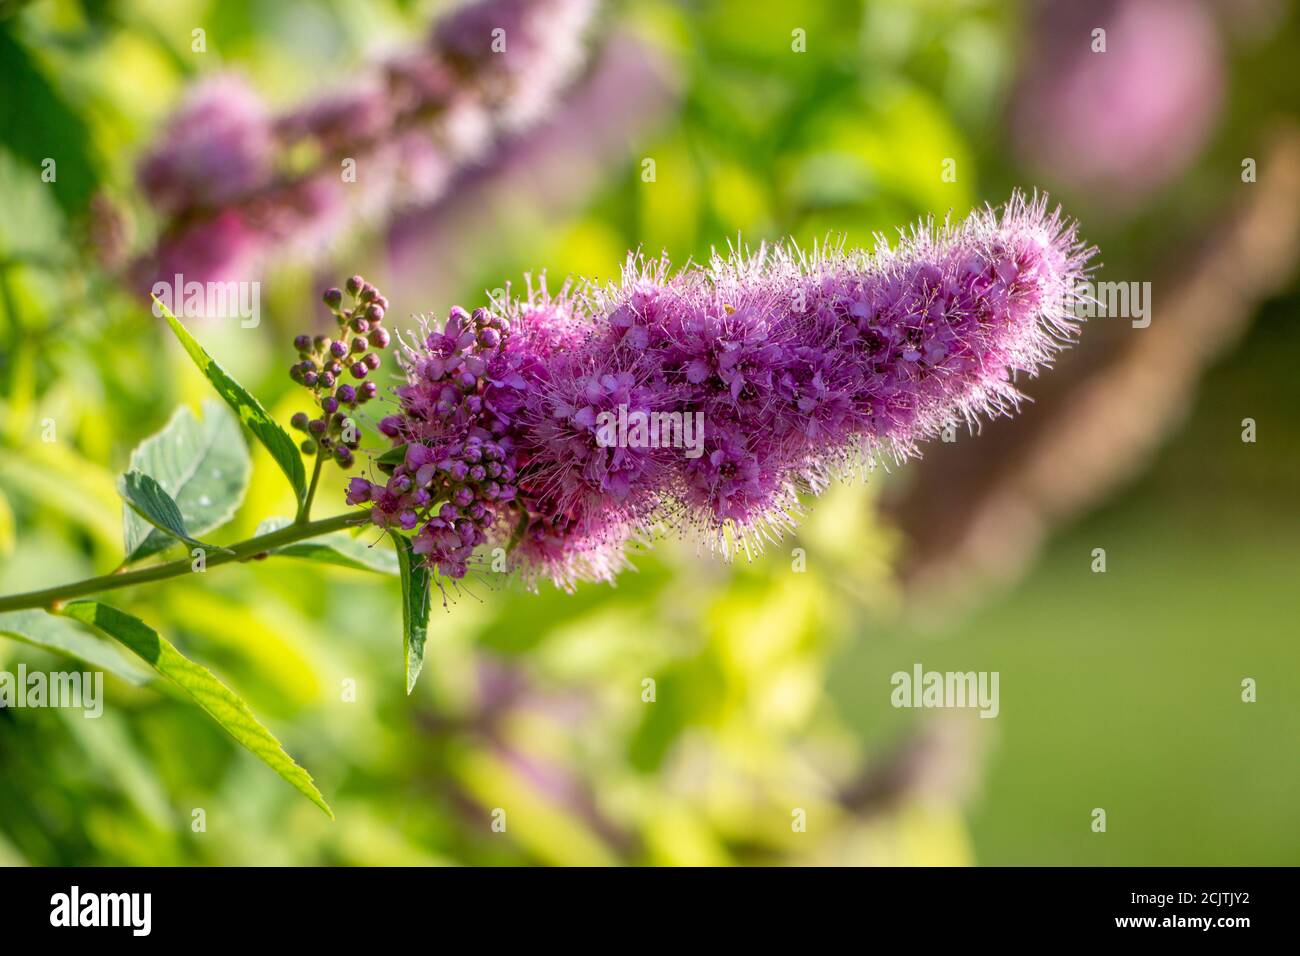 Spiraea Japanese panicle, a variety of ornamental plants growing in the garden. Stock Photo